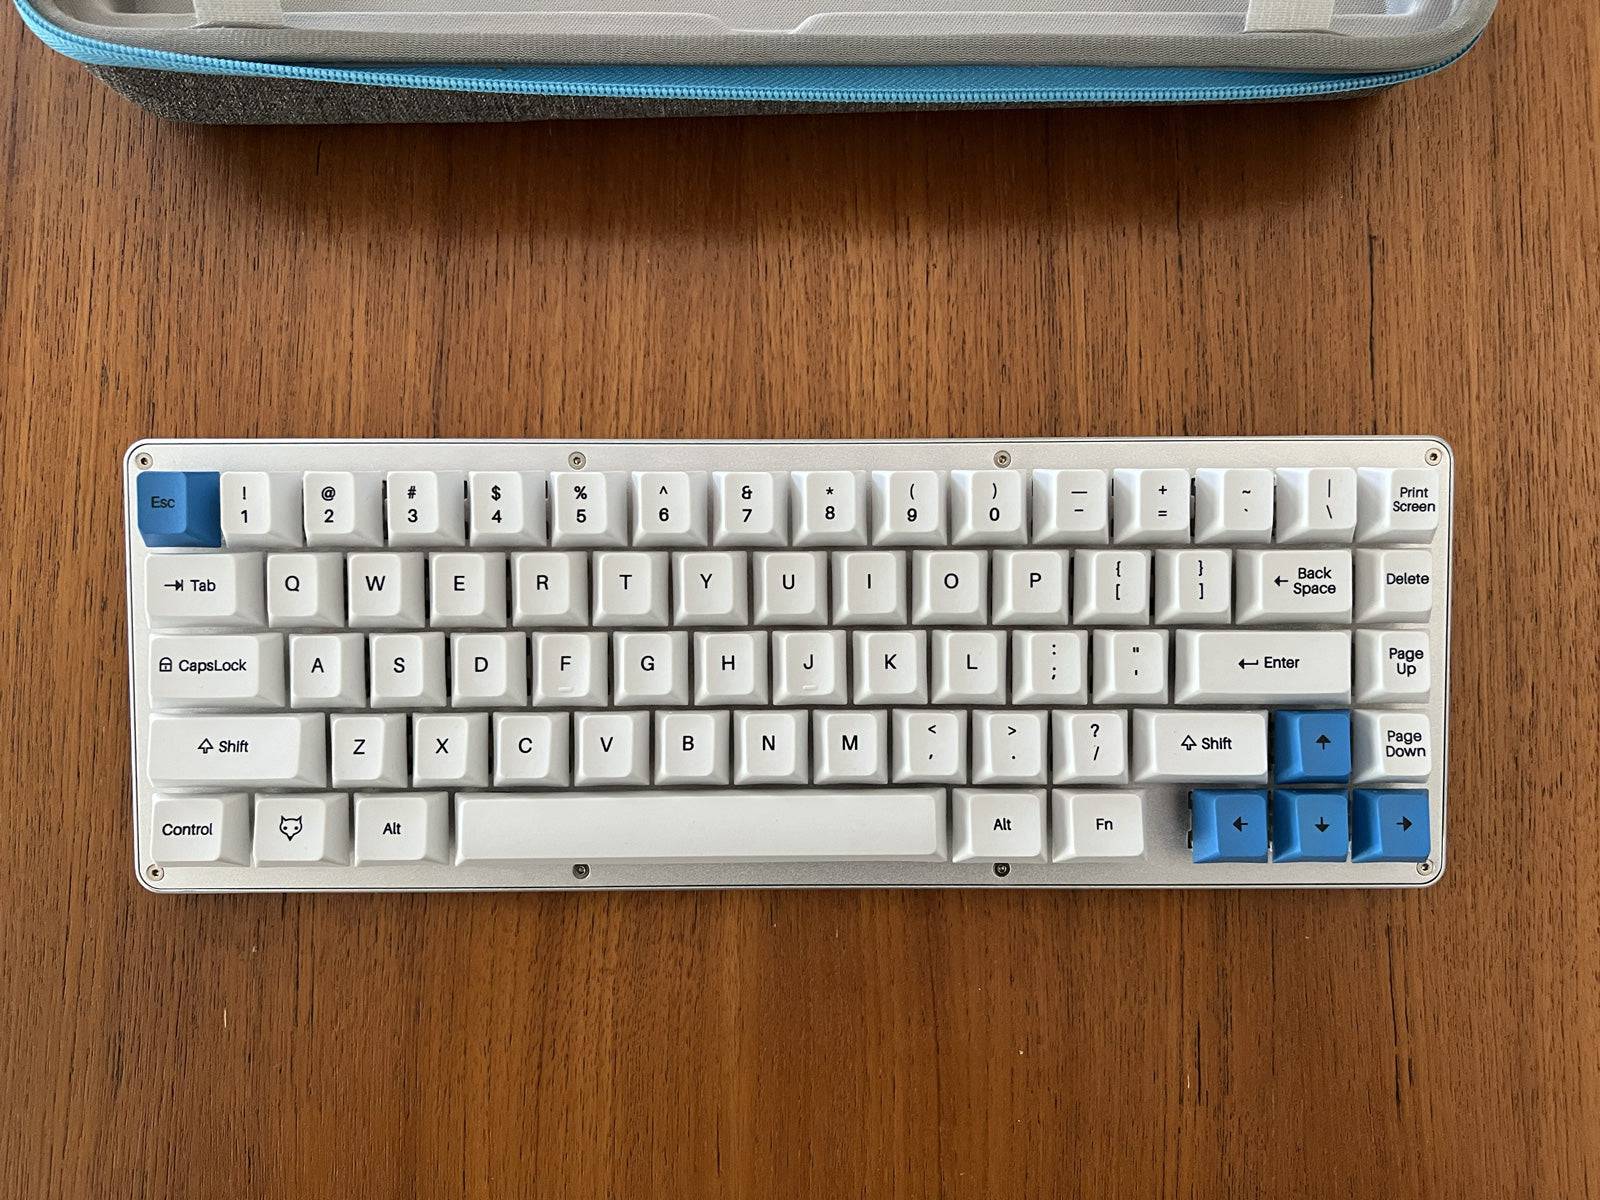 [KFA MARKETPLACE] Assembled WhiteFox Keyboard with Halo True tactile switches - KeebsForAll